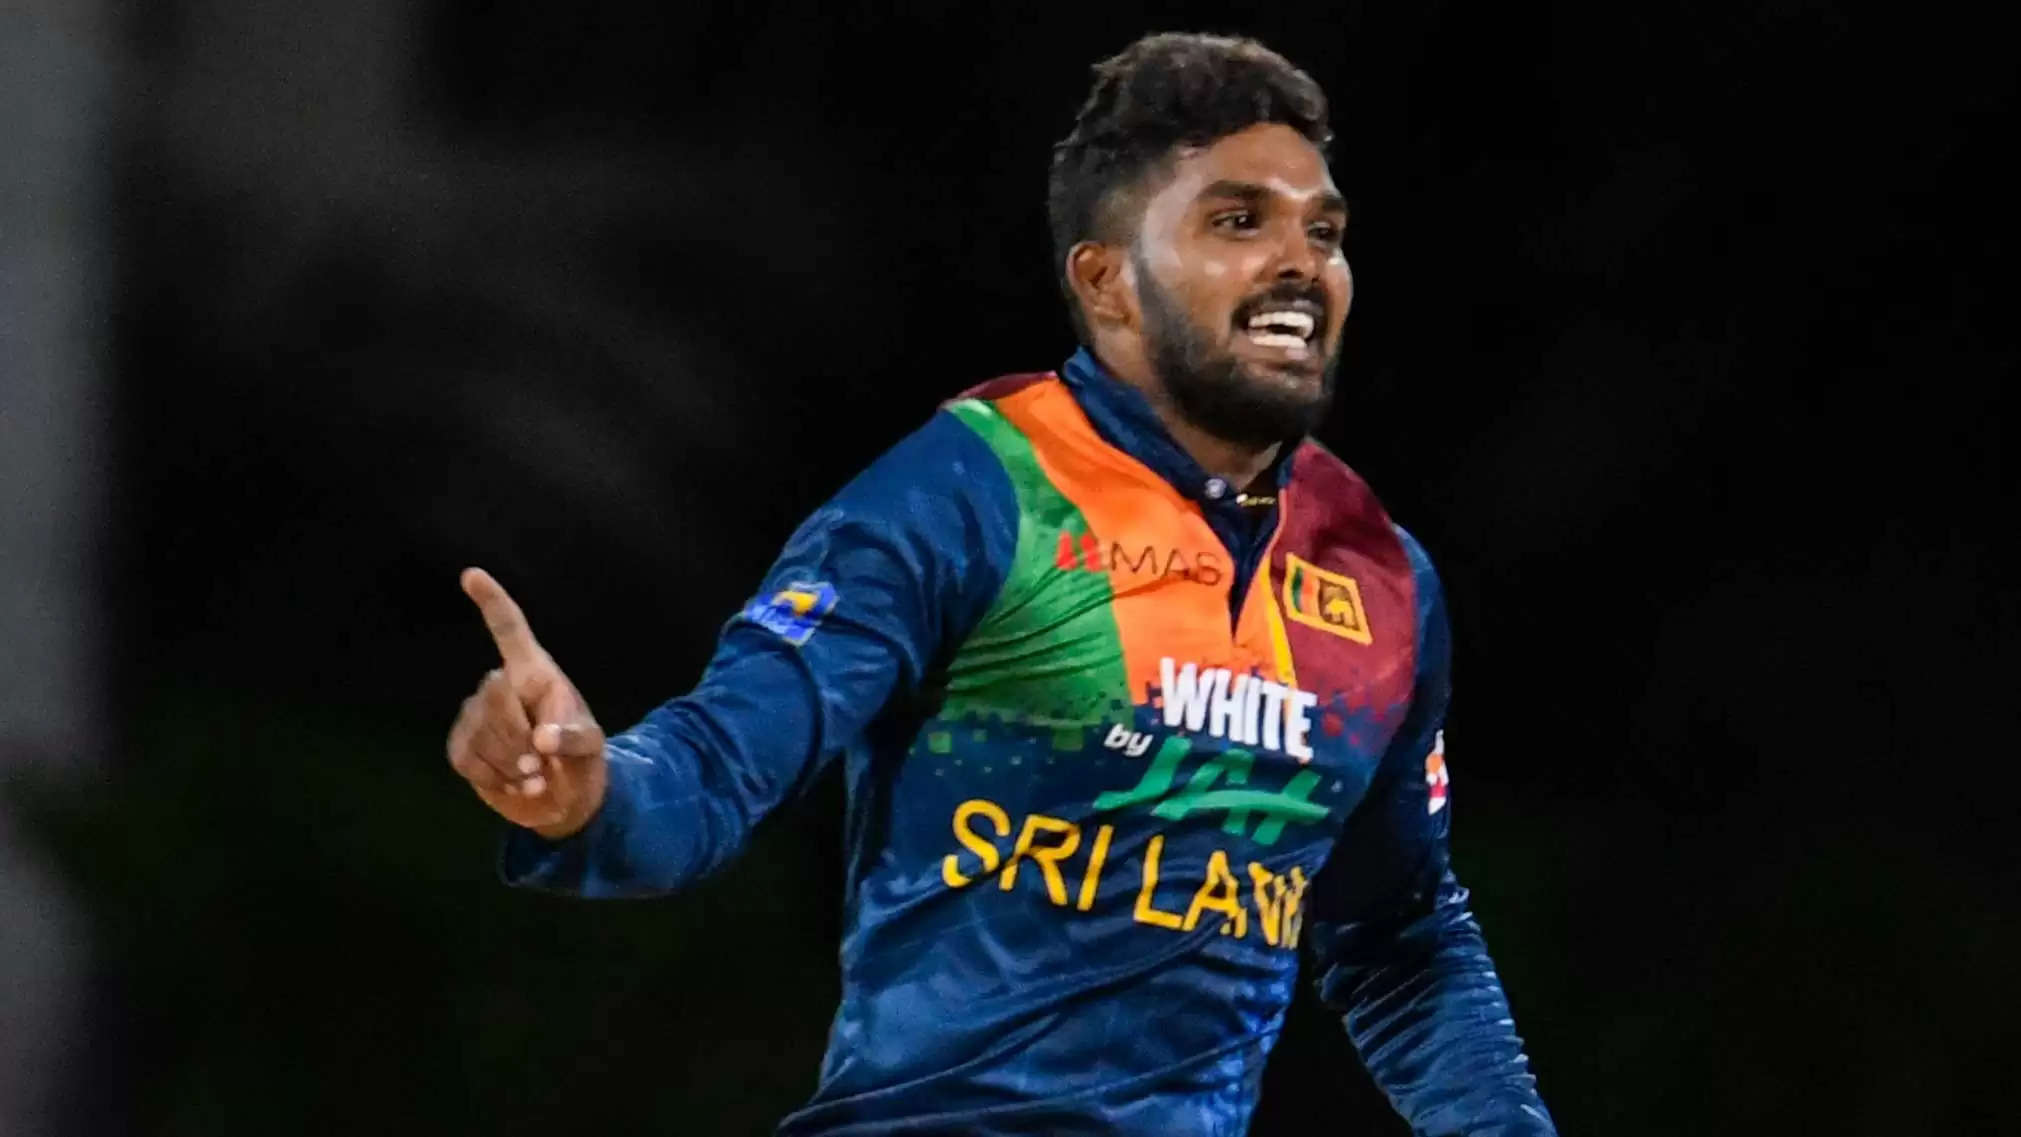 ICC Men’s T20 World Cup 2021: Sri Lanka Team Preview, Squad, Key Players And Probable Playing XI